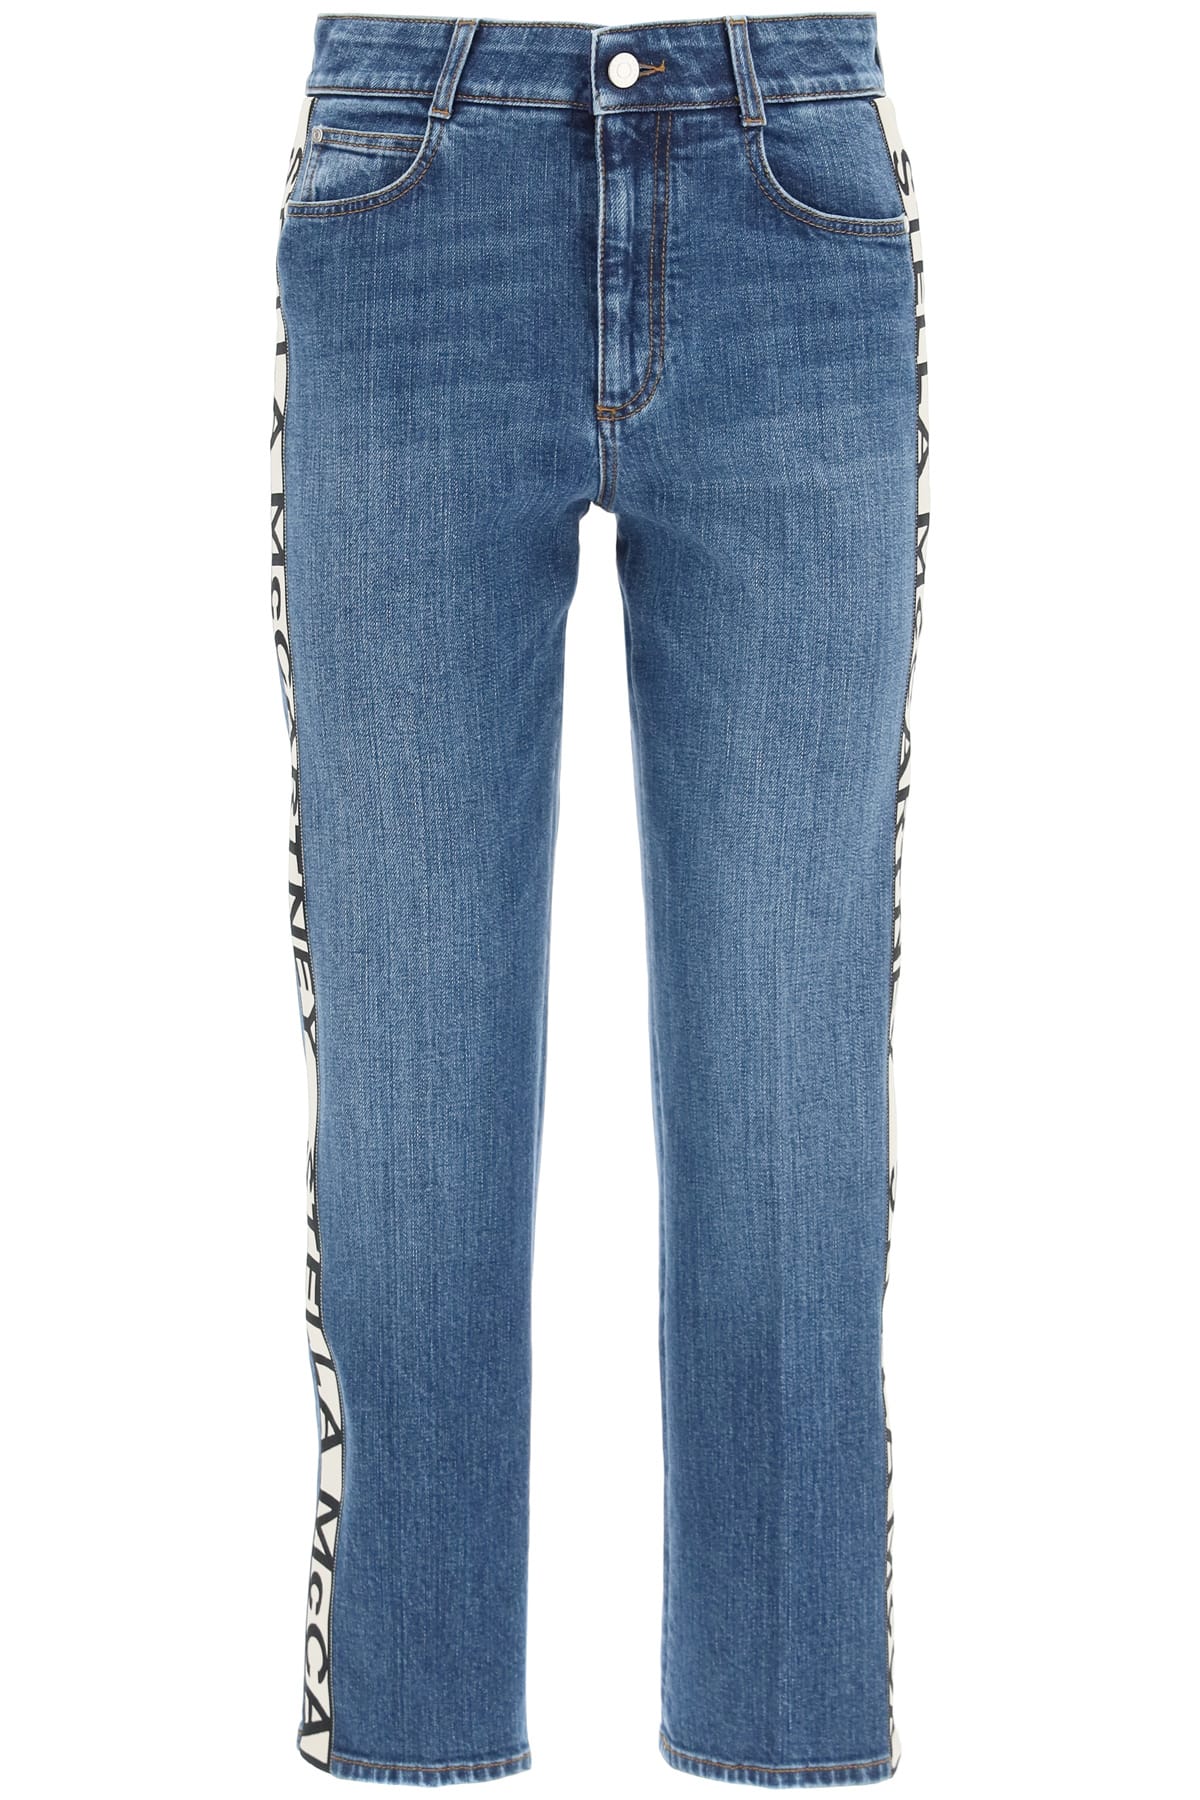 Stella McCartney Rise Cropped Jeans With Monogram Bands